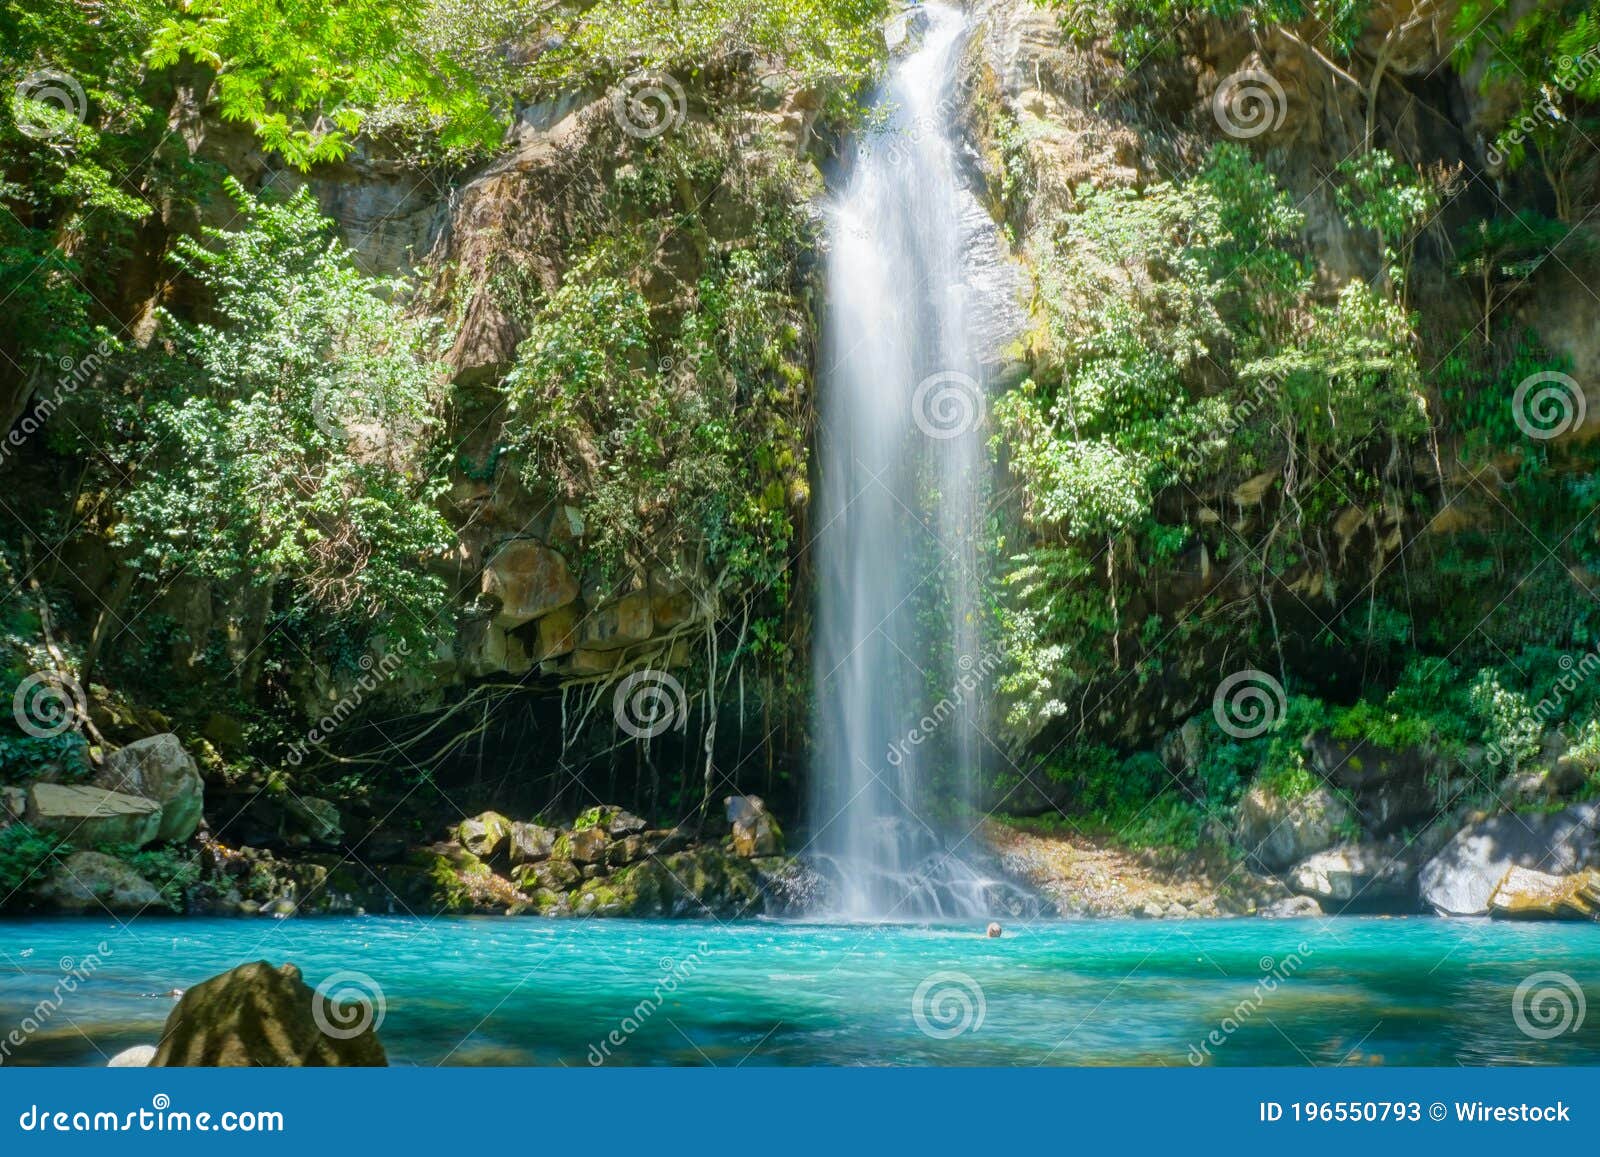 scenic low angle shot of a waterfall from rincon de la vieja volcano national park in costa rica